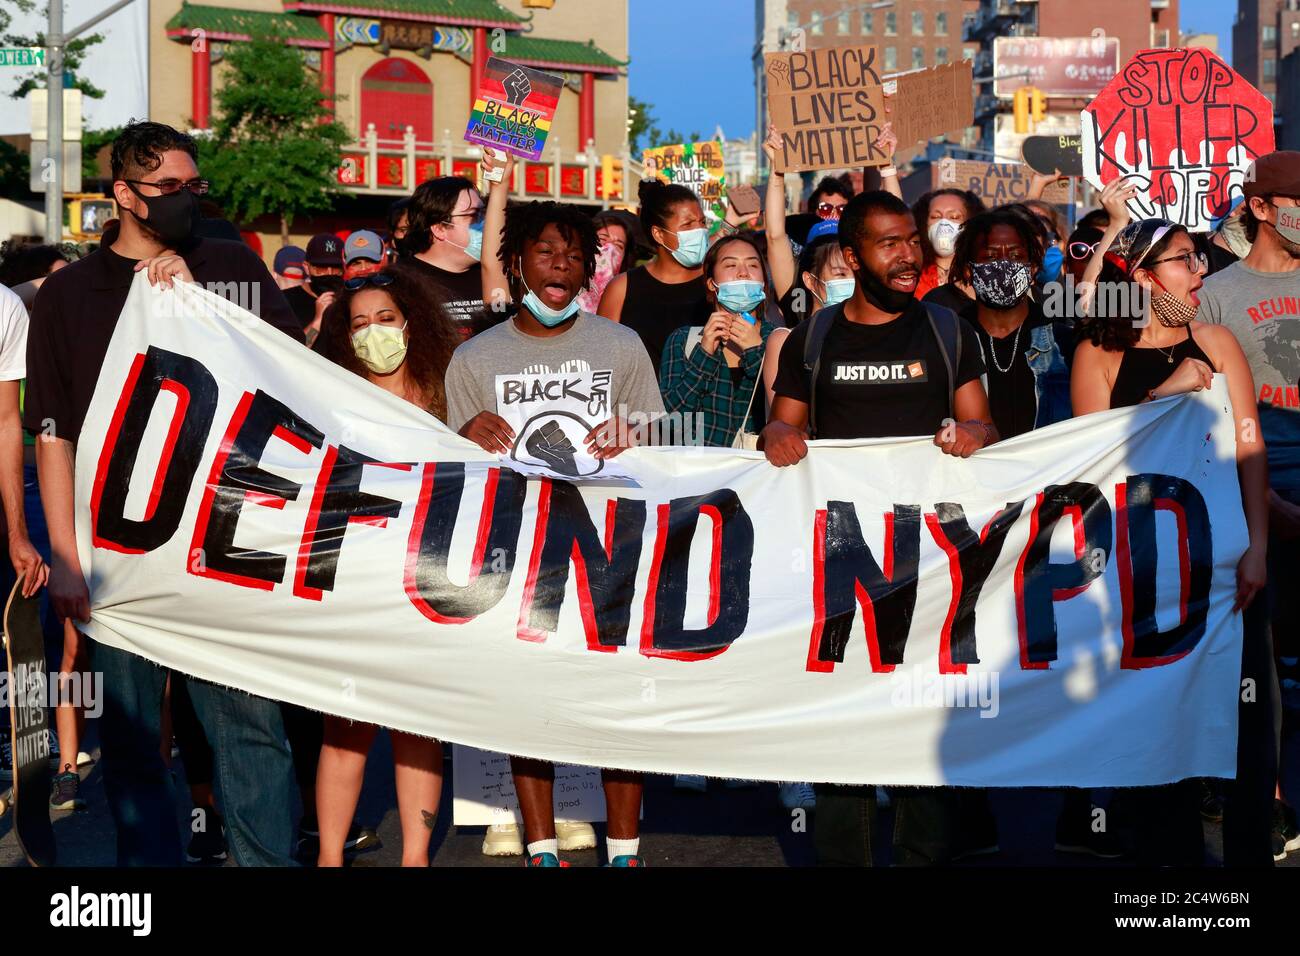 people-holding-a-defund-nypd-banner-at-a-protest-march-toward-city-hall-in-new-york-ny-june-25-2020-a-group-of-protesters-marches-along-canal-street-in-manhattan-toward-lower-manhattan-2C4W6BN.jpg